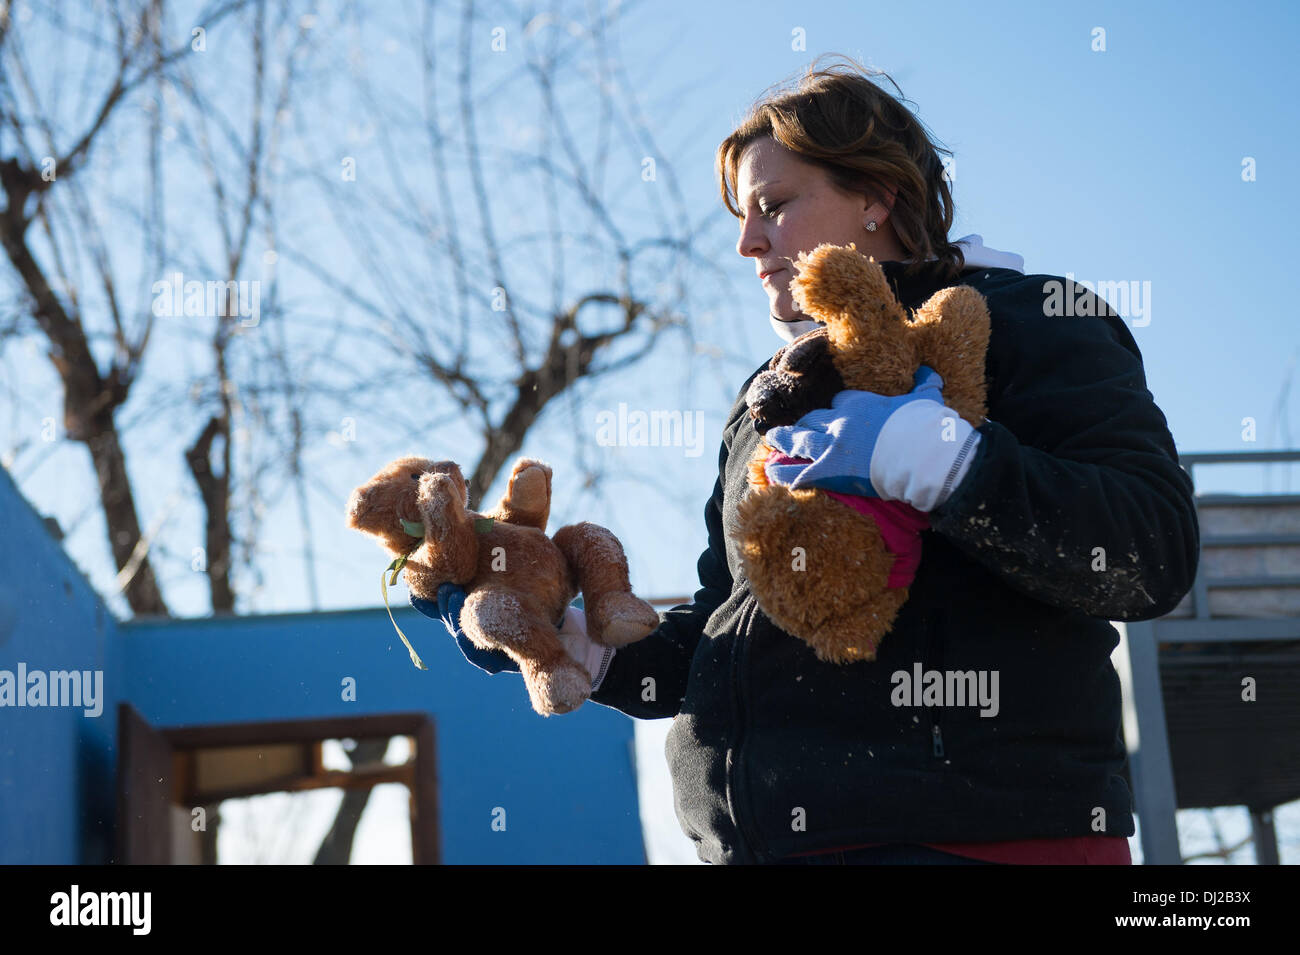 Washington, Illinois, USA. 19th Nov, 2013. SHANNON WILLIAM holds a few Teddy Bears that she found in the rubble of her home on Fayette Ave as she looks for belongings destroyed from the tornado that hit Sunday. A violent storm brought 81 tornadoes throughout the Midwest killing six people and damaging or destroying thousands of homes. © Courtney Sacco/ZUMAPRESS.com/Alamy Live News Stock Photo